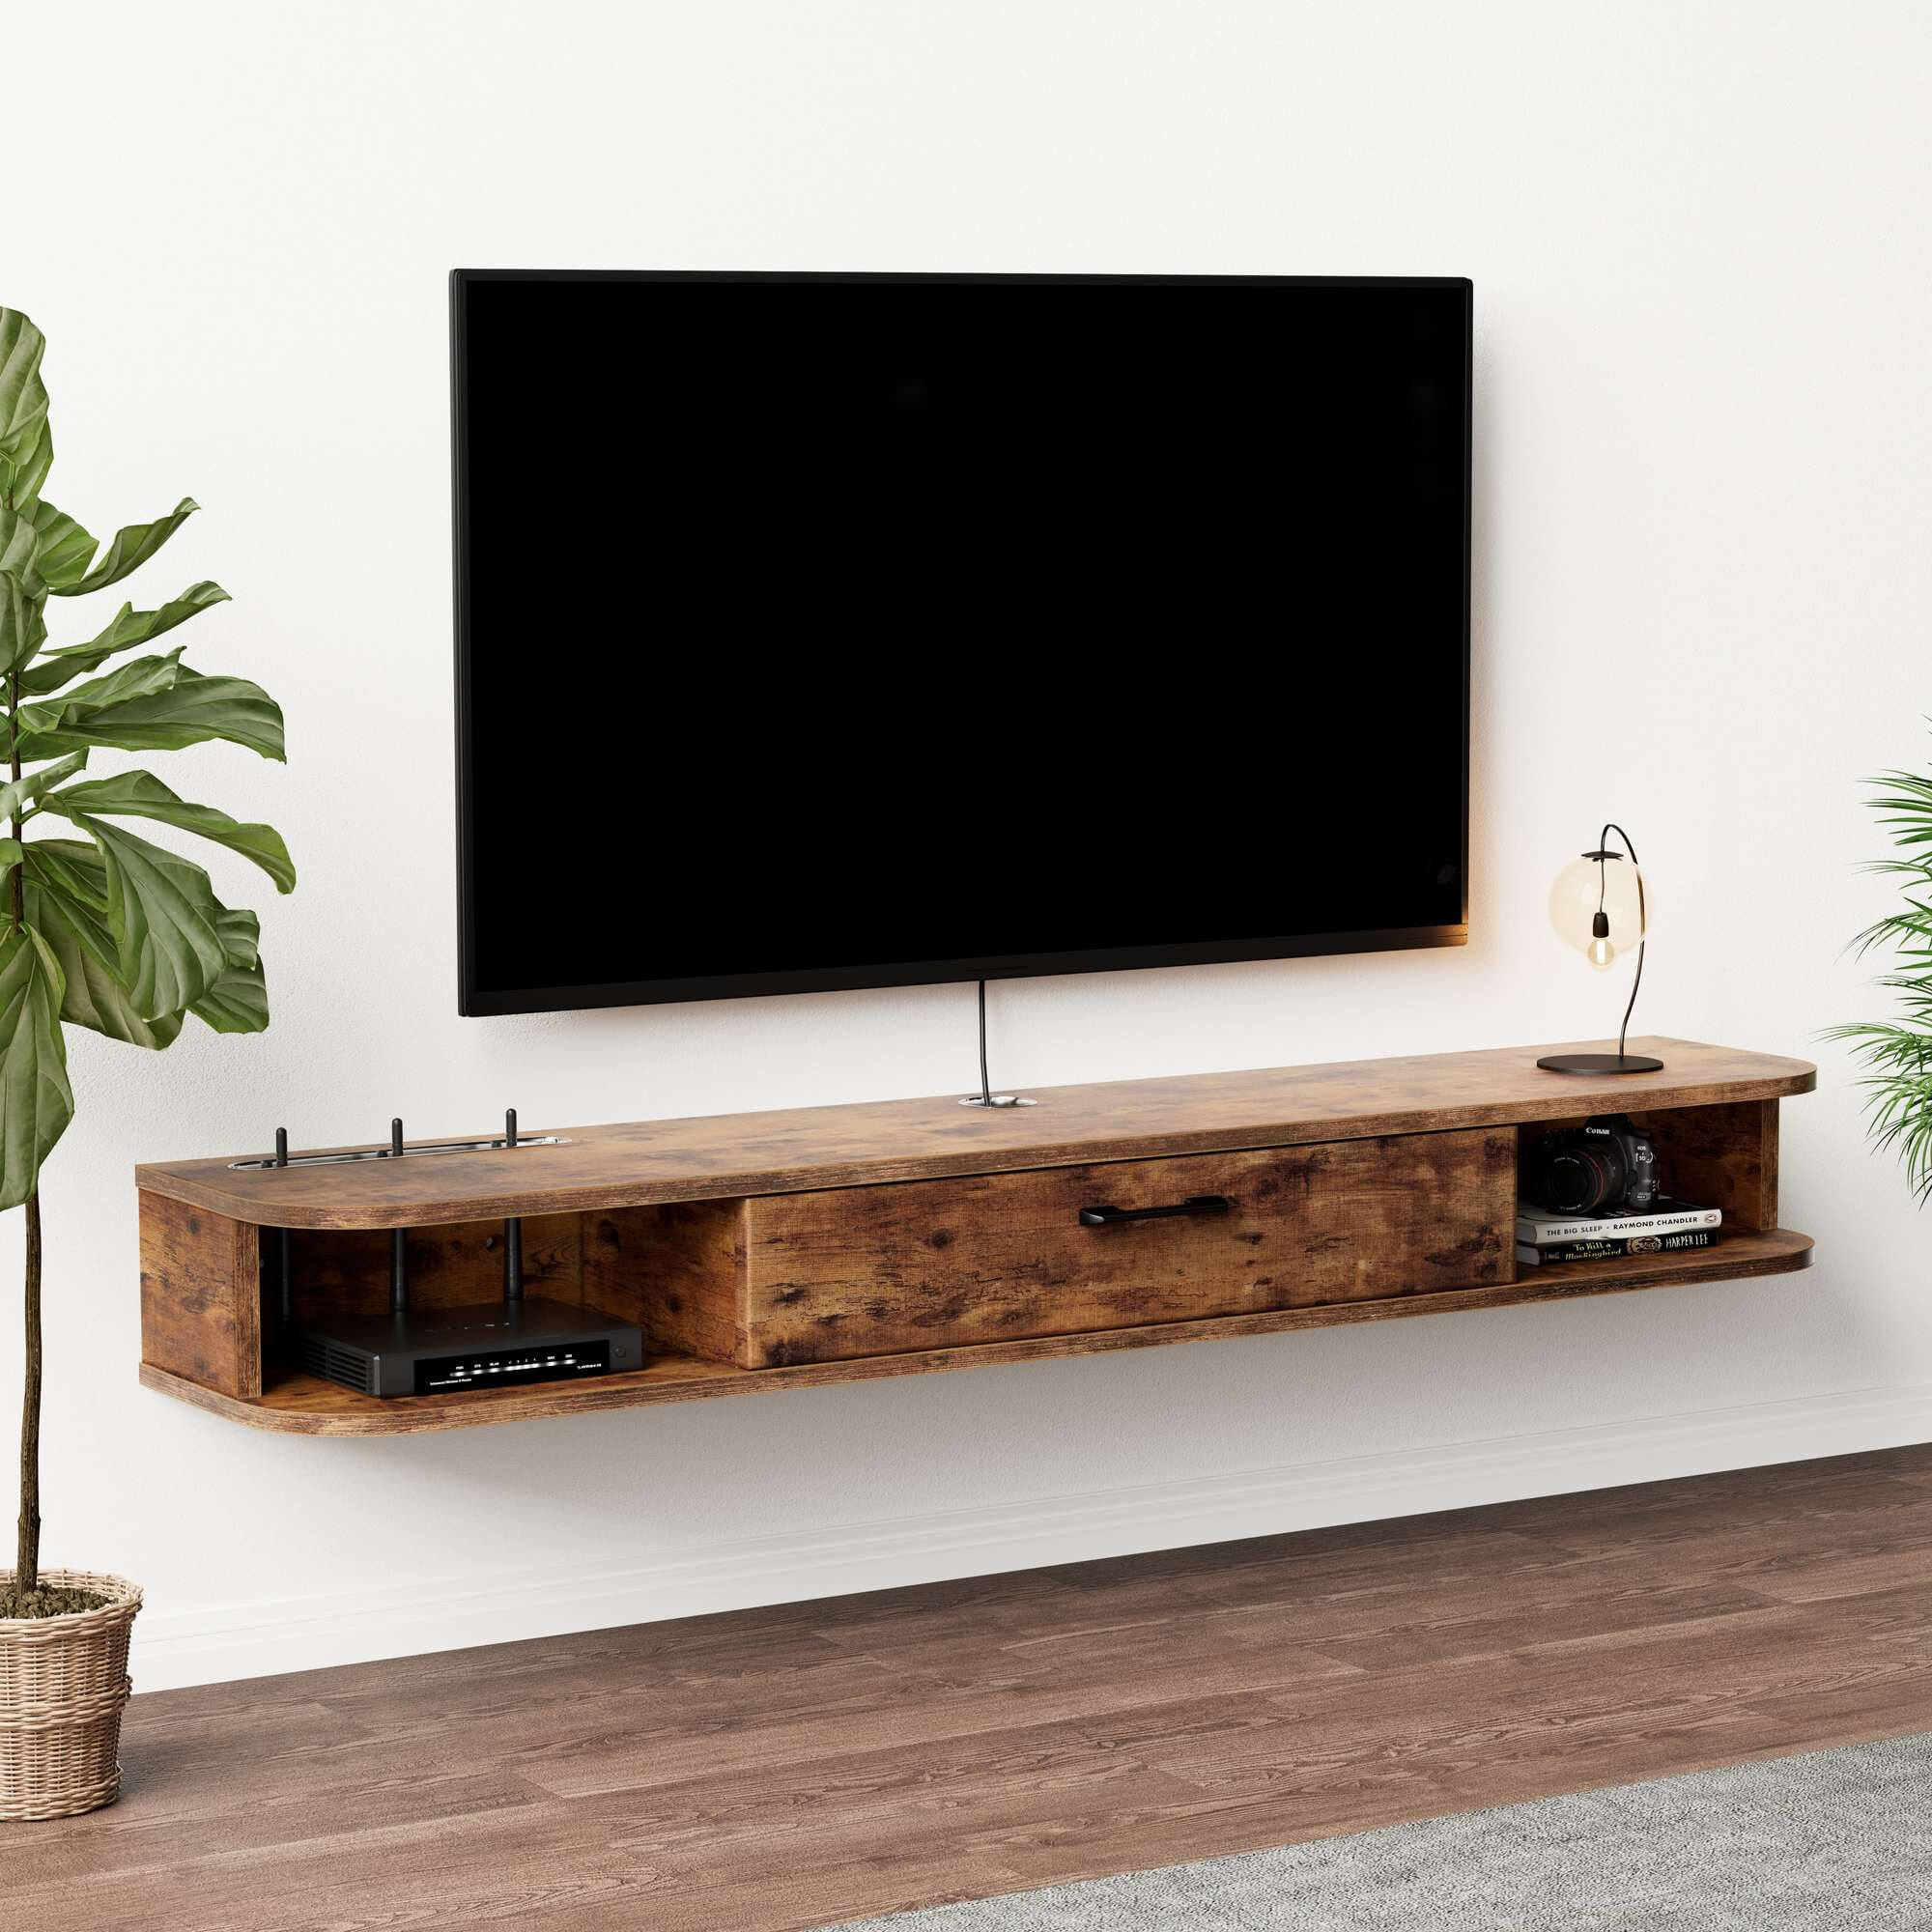 Rustic Brown Slim Floating TV Stand Wall Shelf, up to 60" TVs